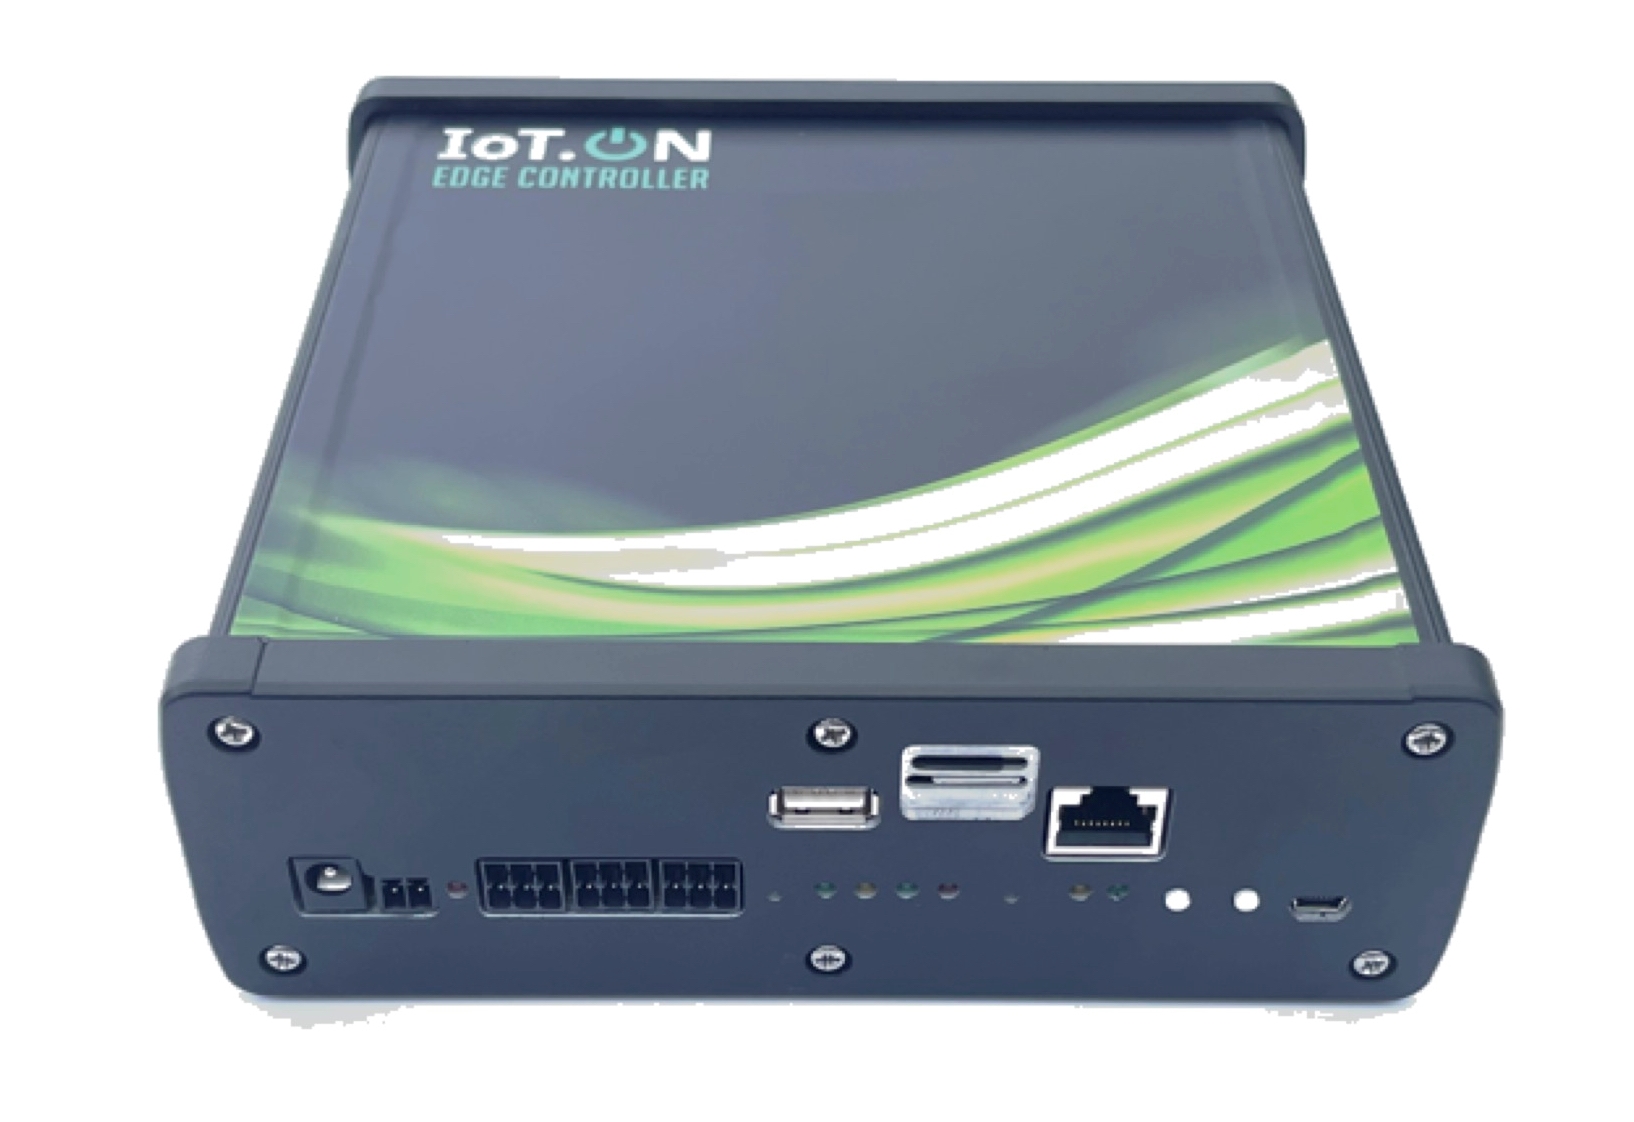 IoTecha Introduces IoT.ON EDGE™ Controller at Distributech